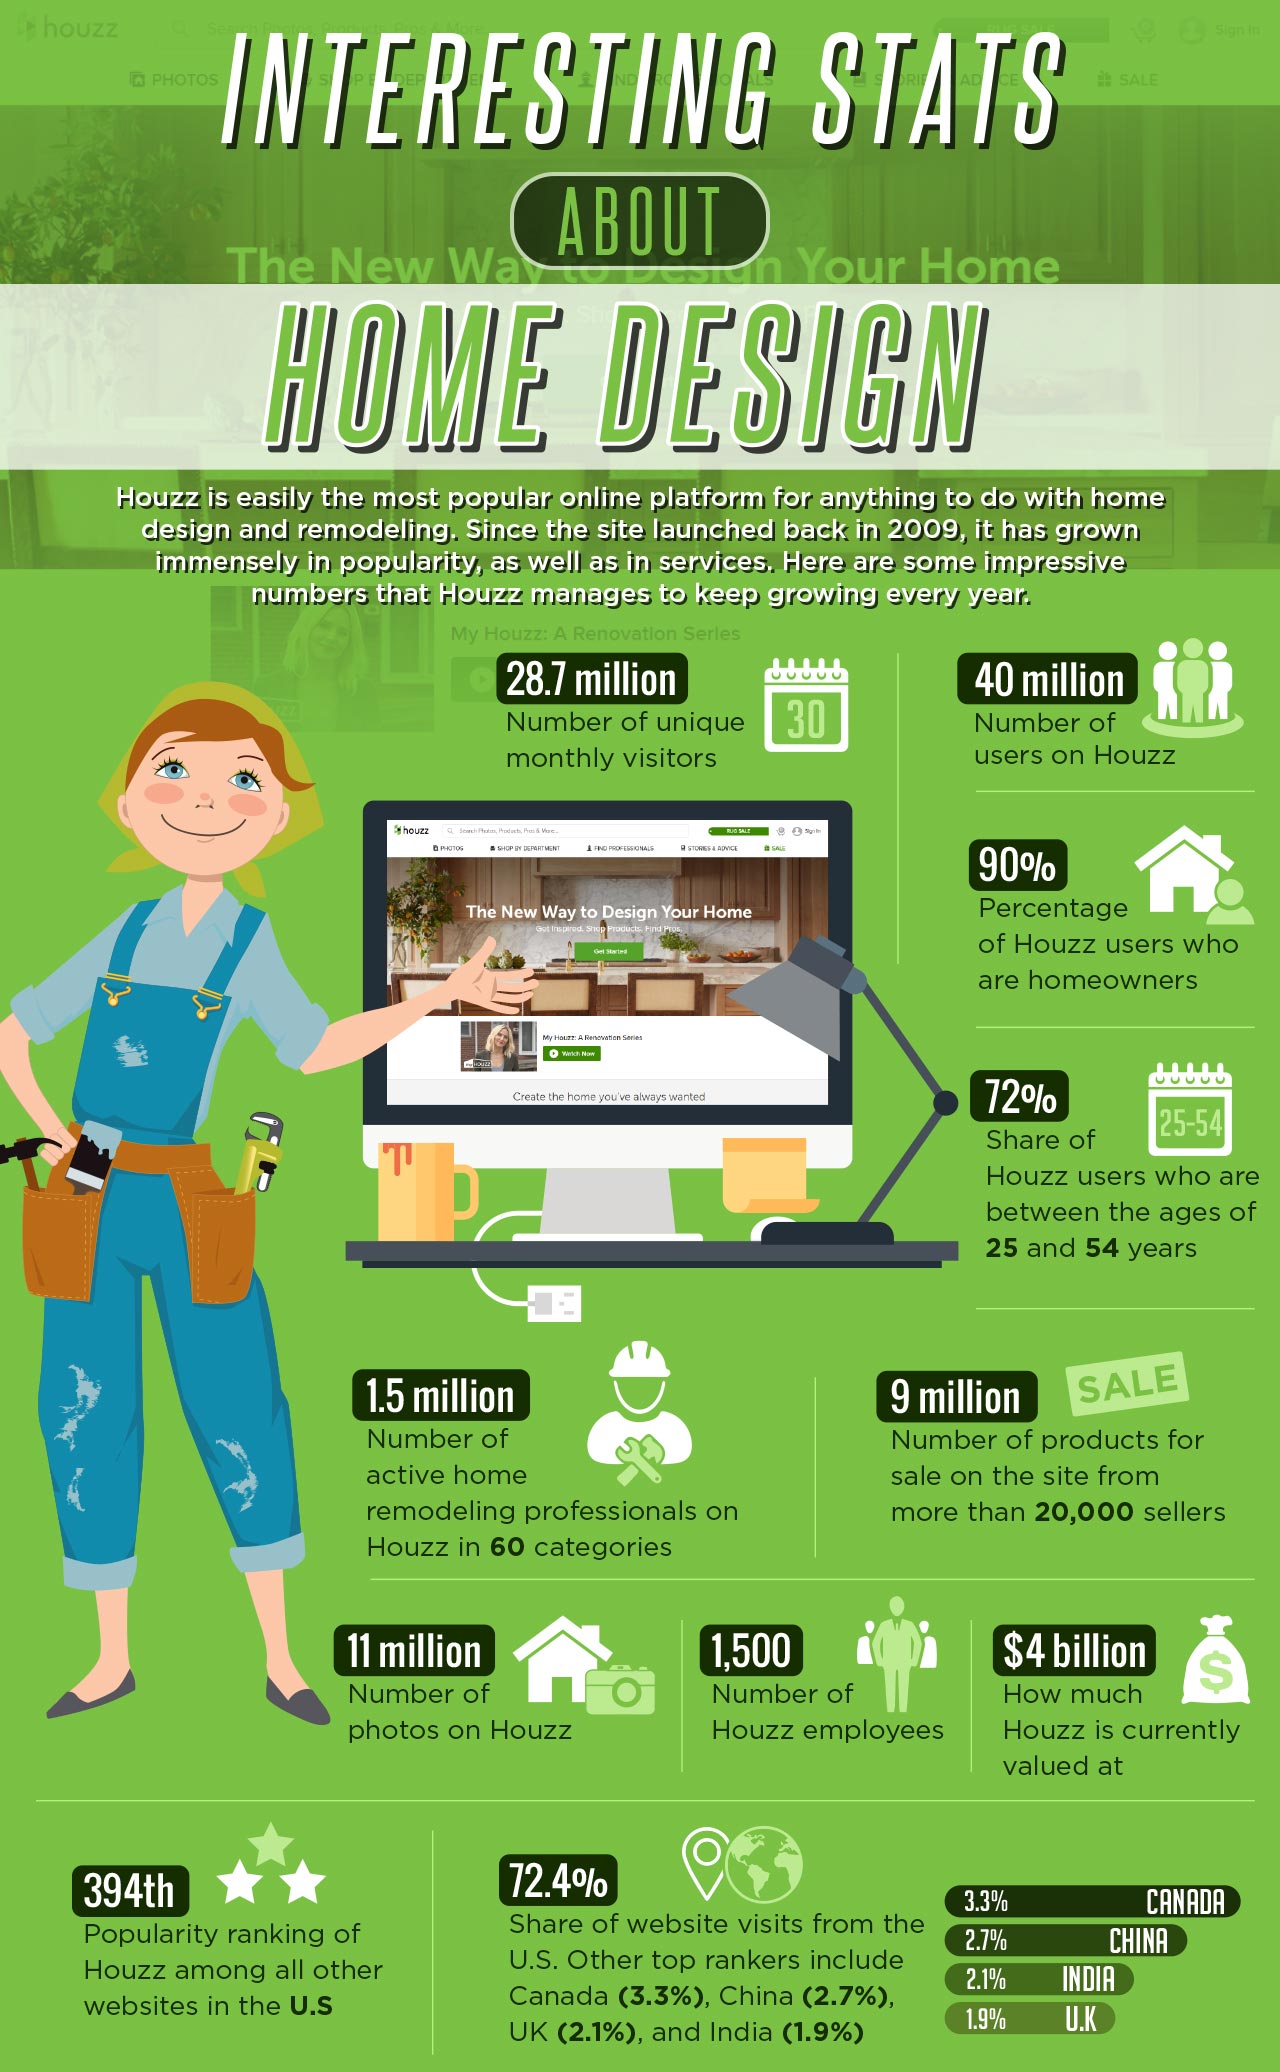 infographic-interesting-stats-about-home-design-website-houzz